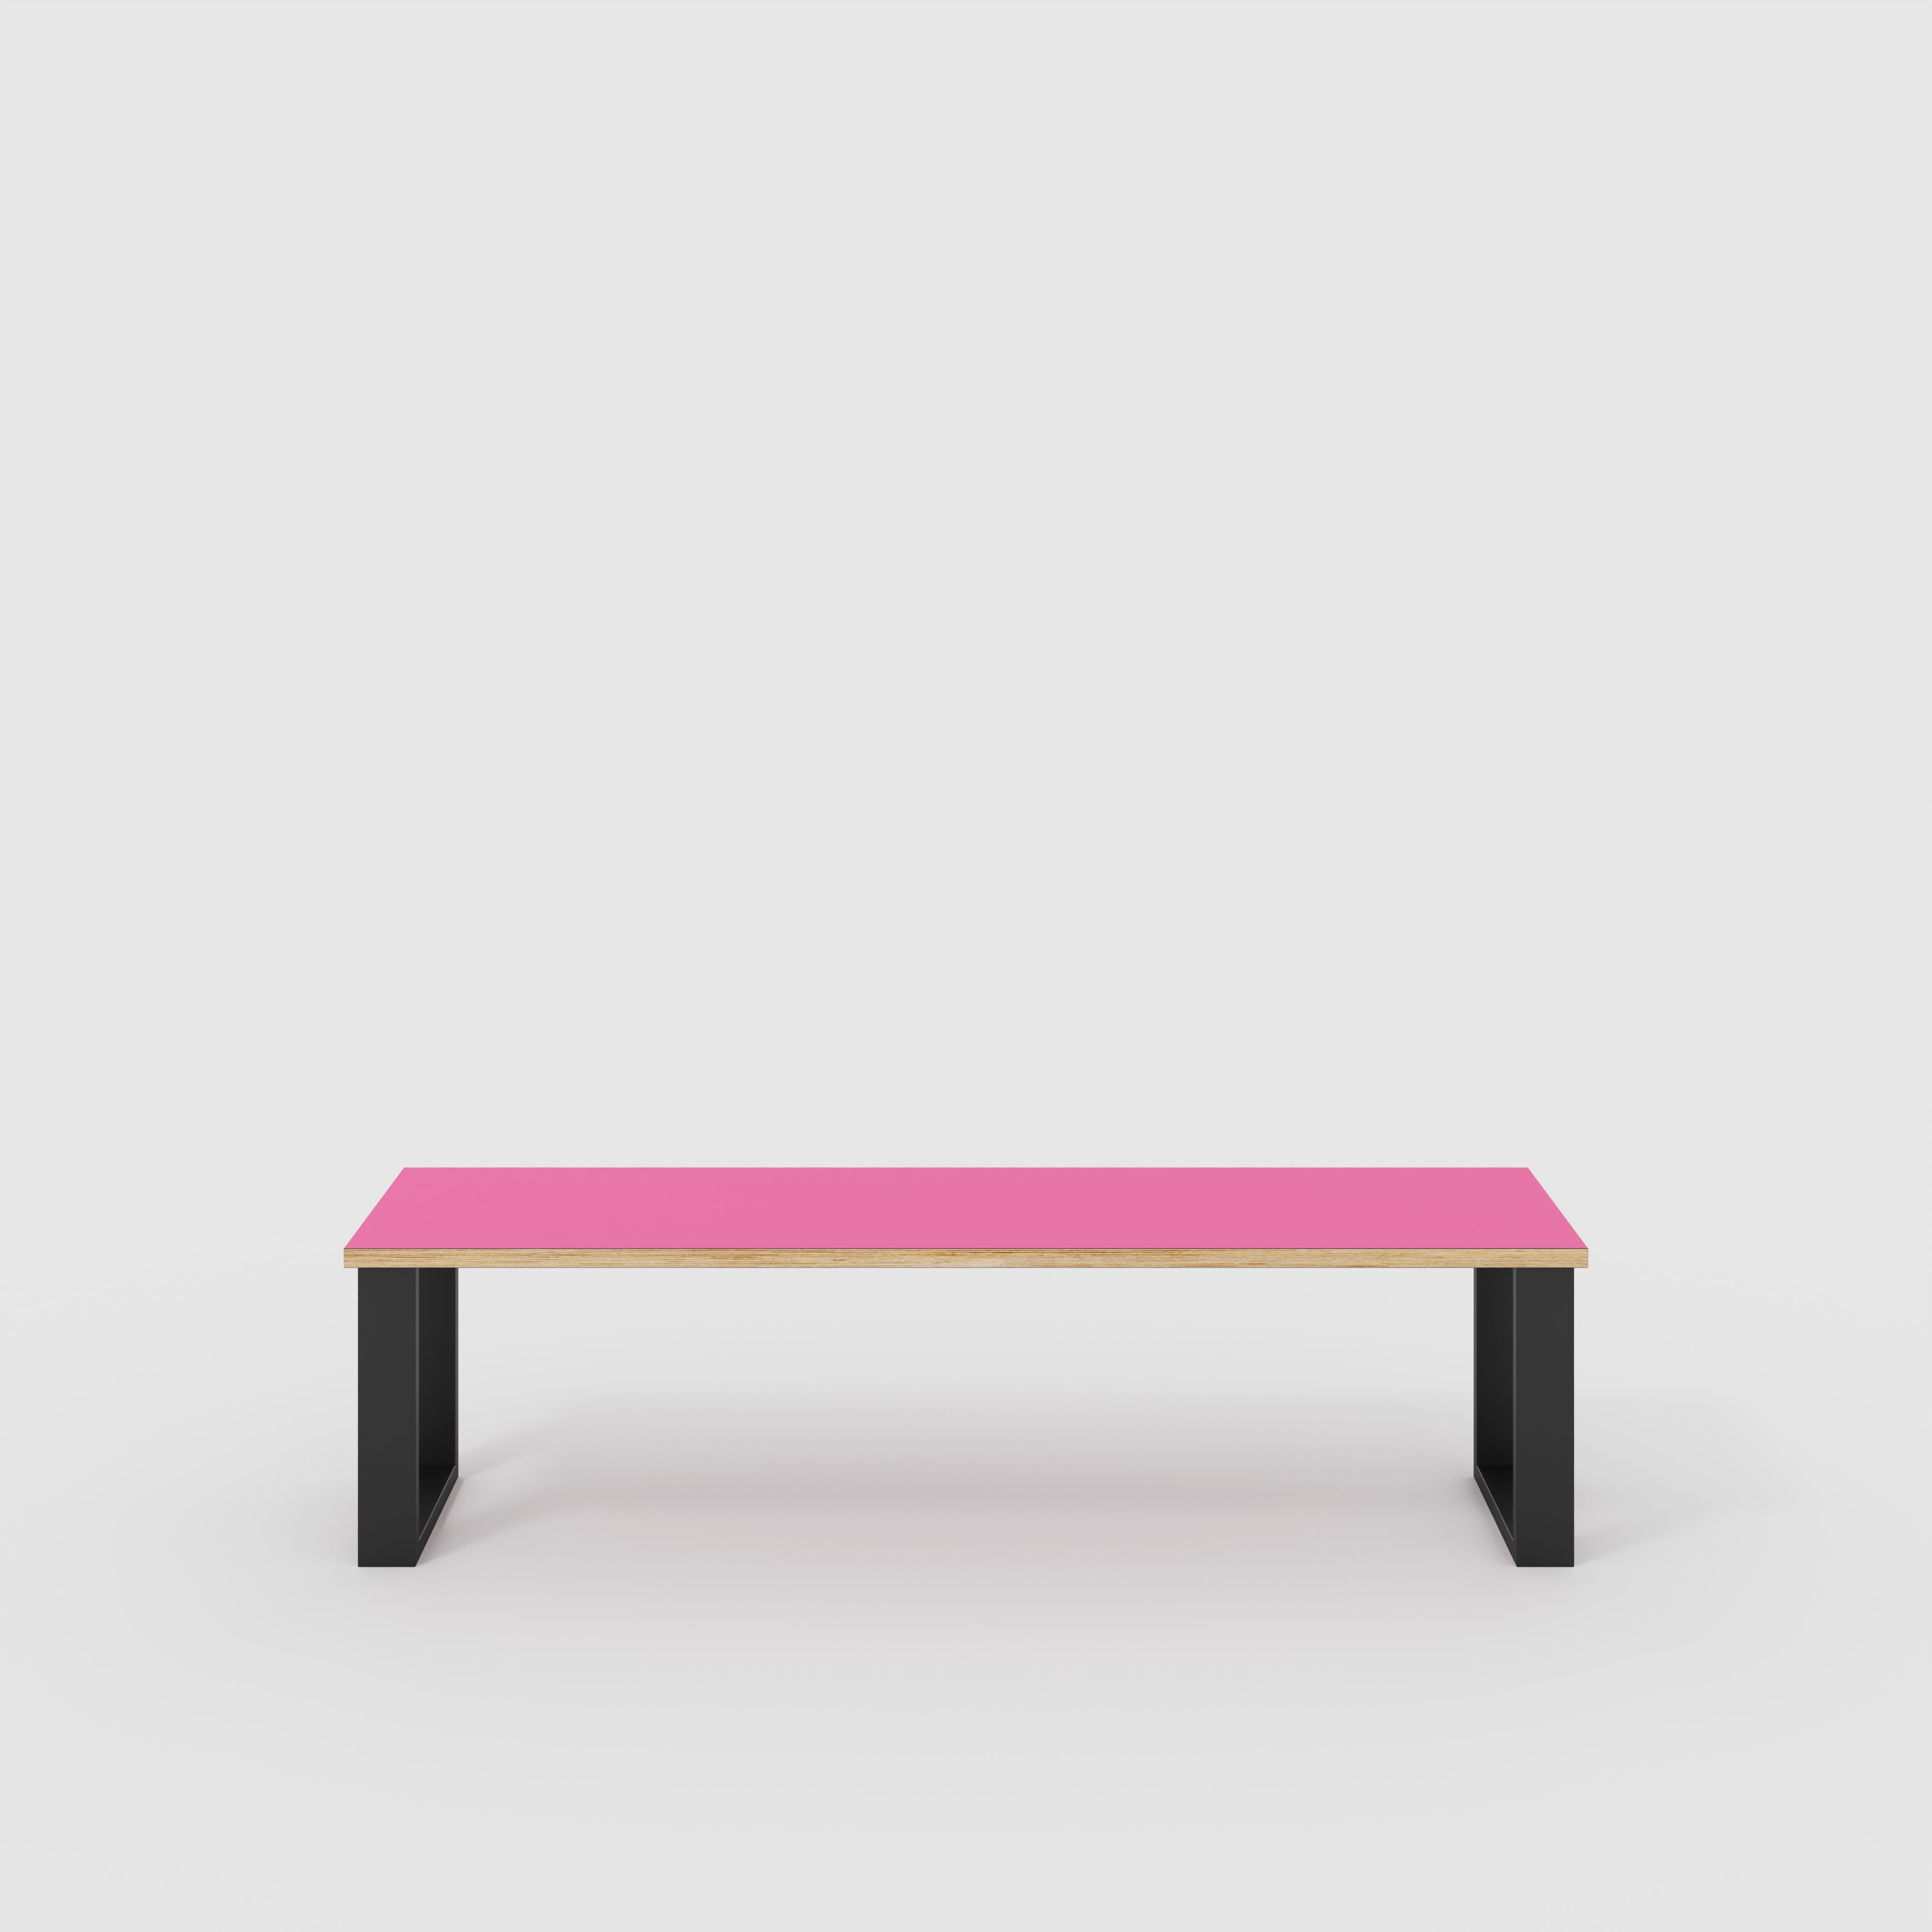 Bench Seat with Black Industrial Legs - Formica Juicy Pink - 1600(w) x 400(d)